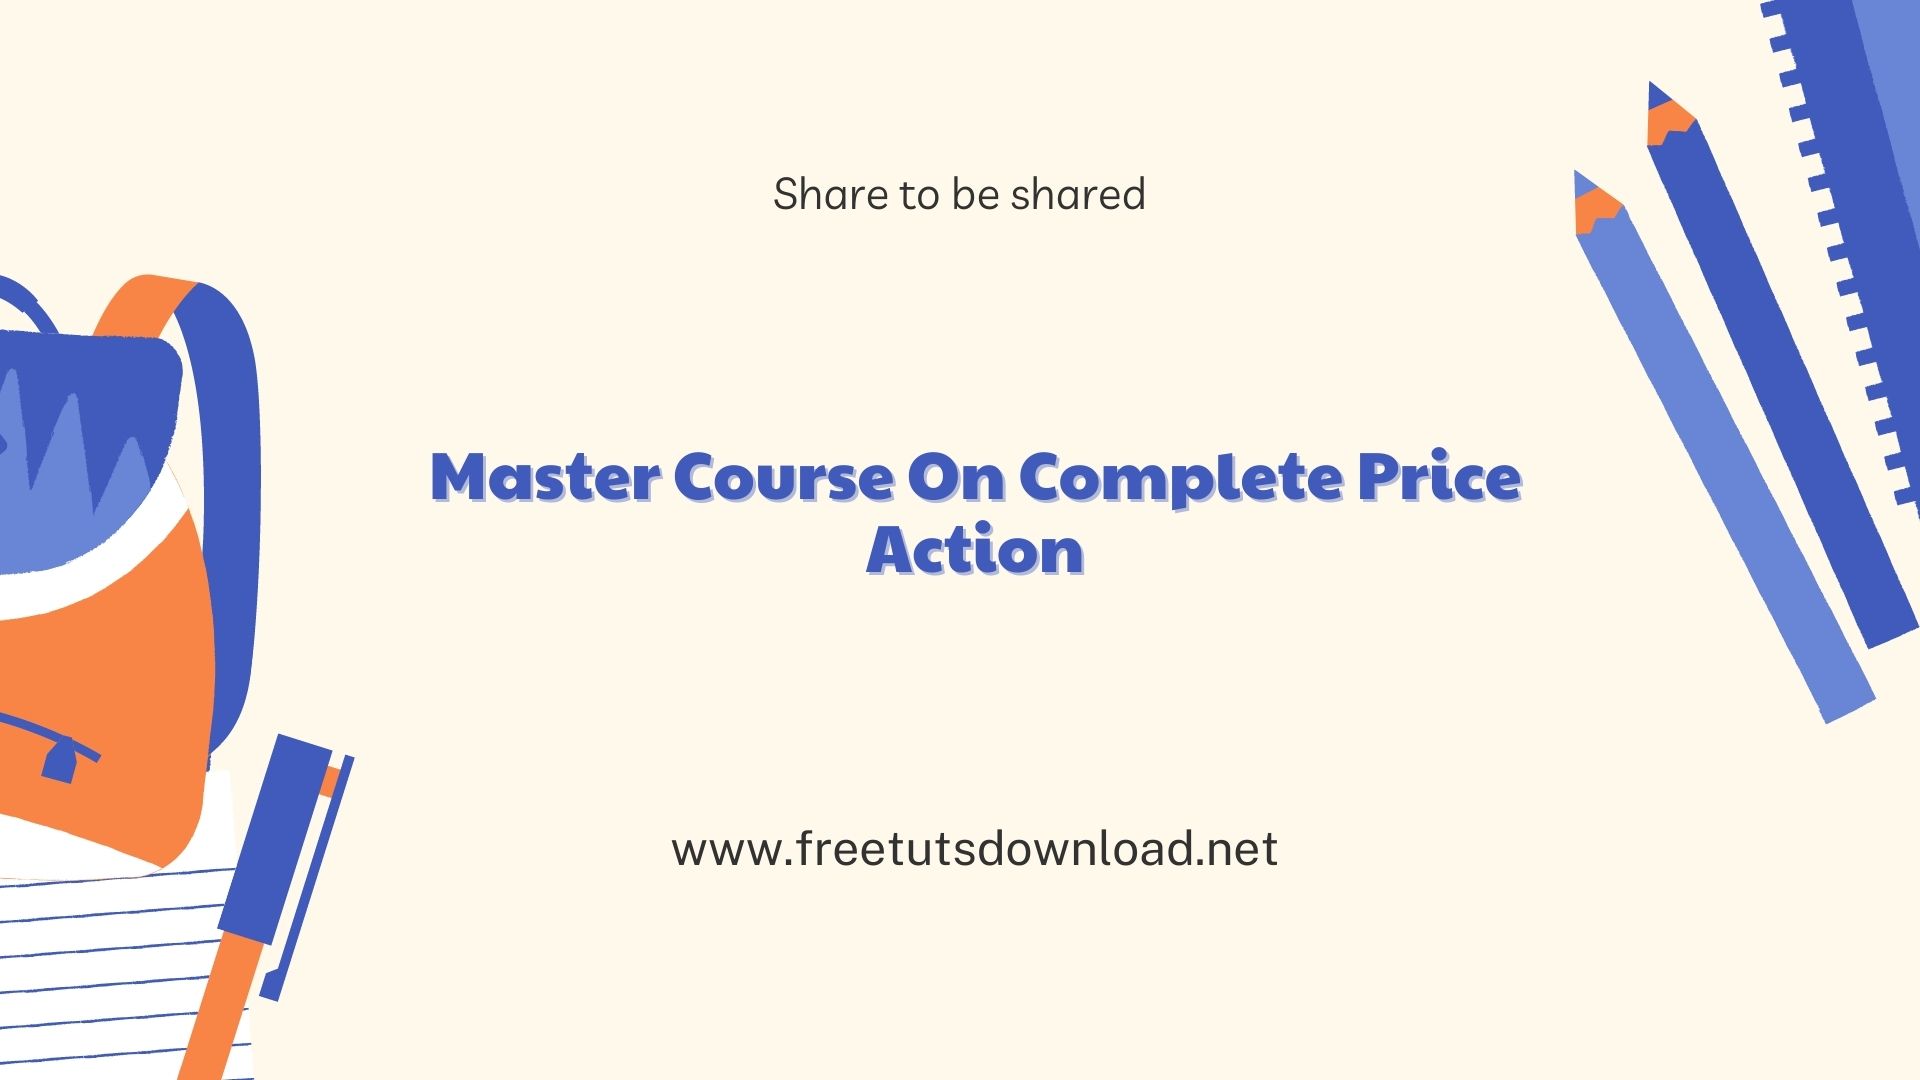 Master Course On Complete Price Action